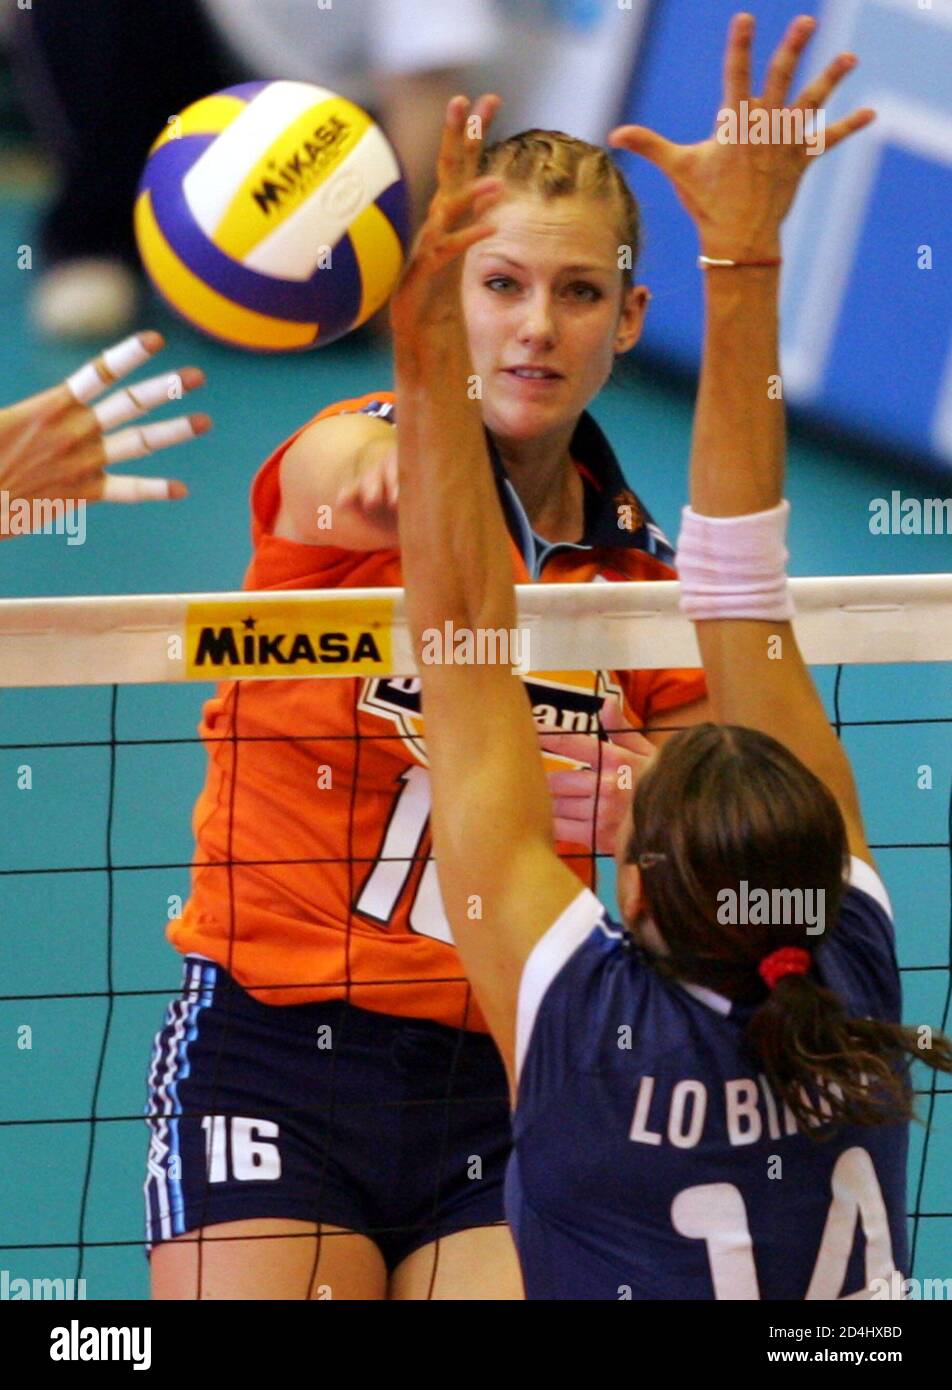 The Stam spikes the ball Italy's Lo Bianco in the World Grand Prix women's volleybal in Sendai, Japan. The Netherlands' Debby (L) spikes the ball past Italy's blocker Eleonora